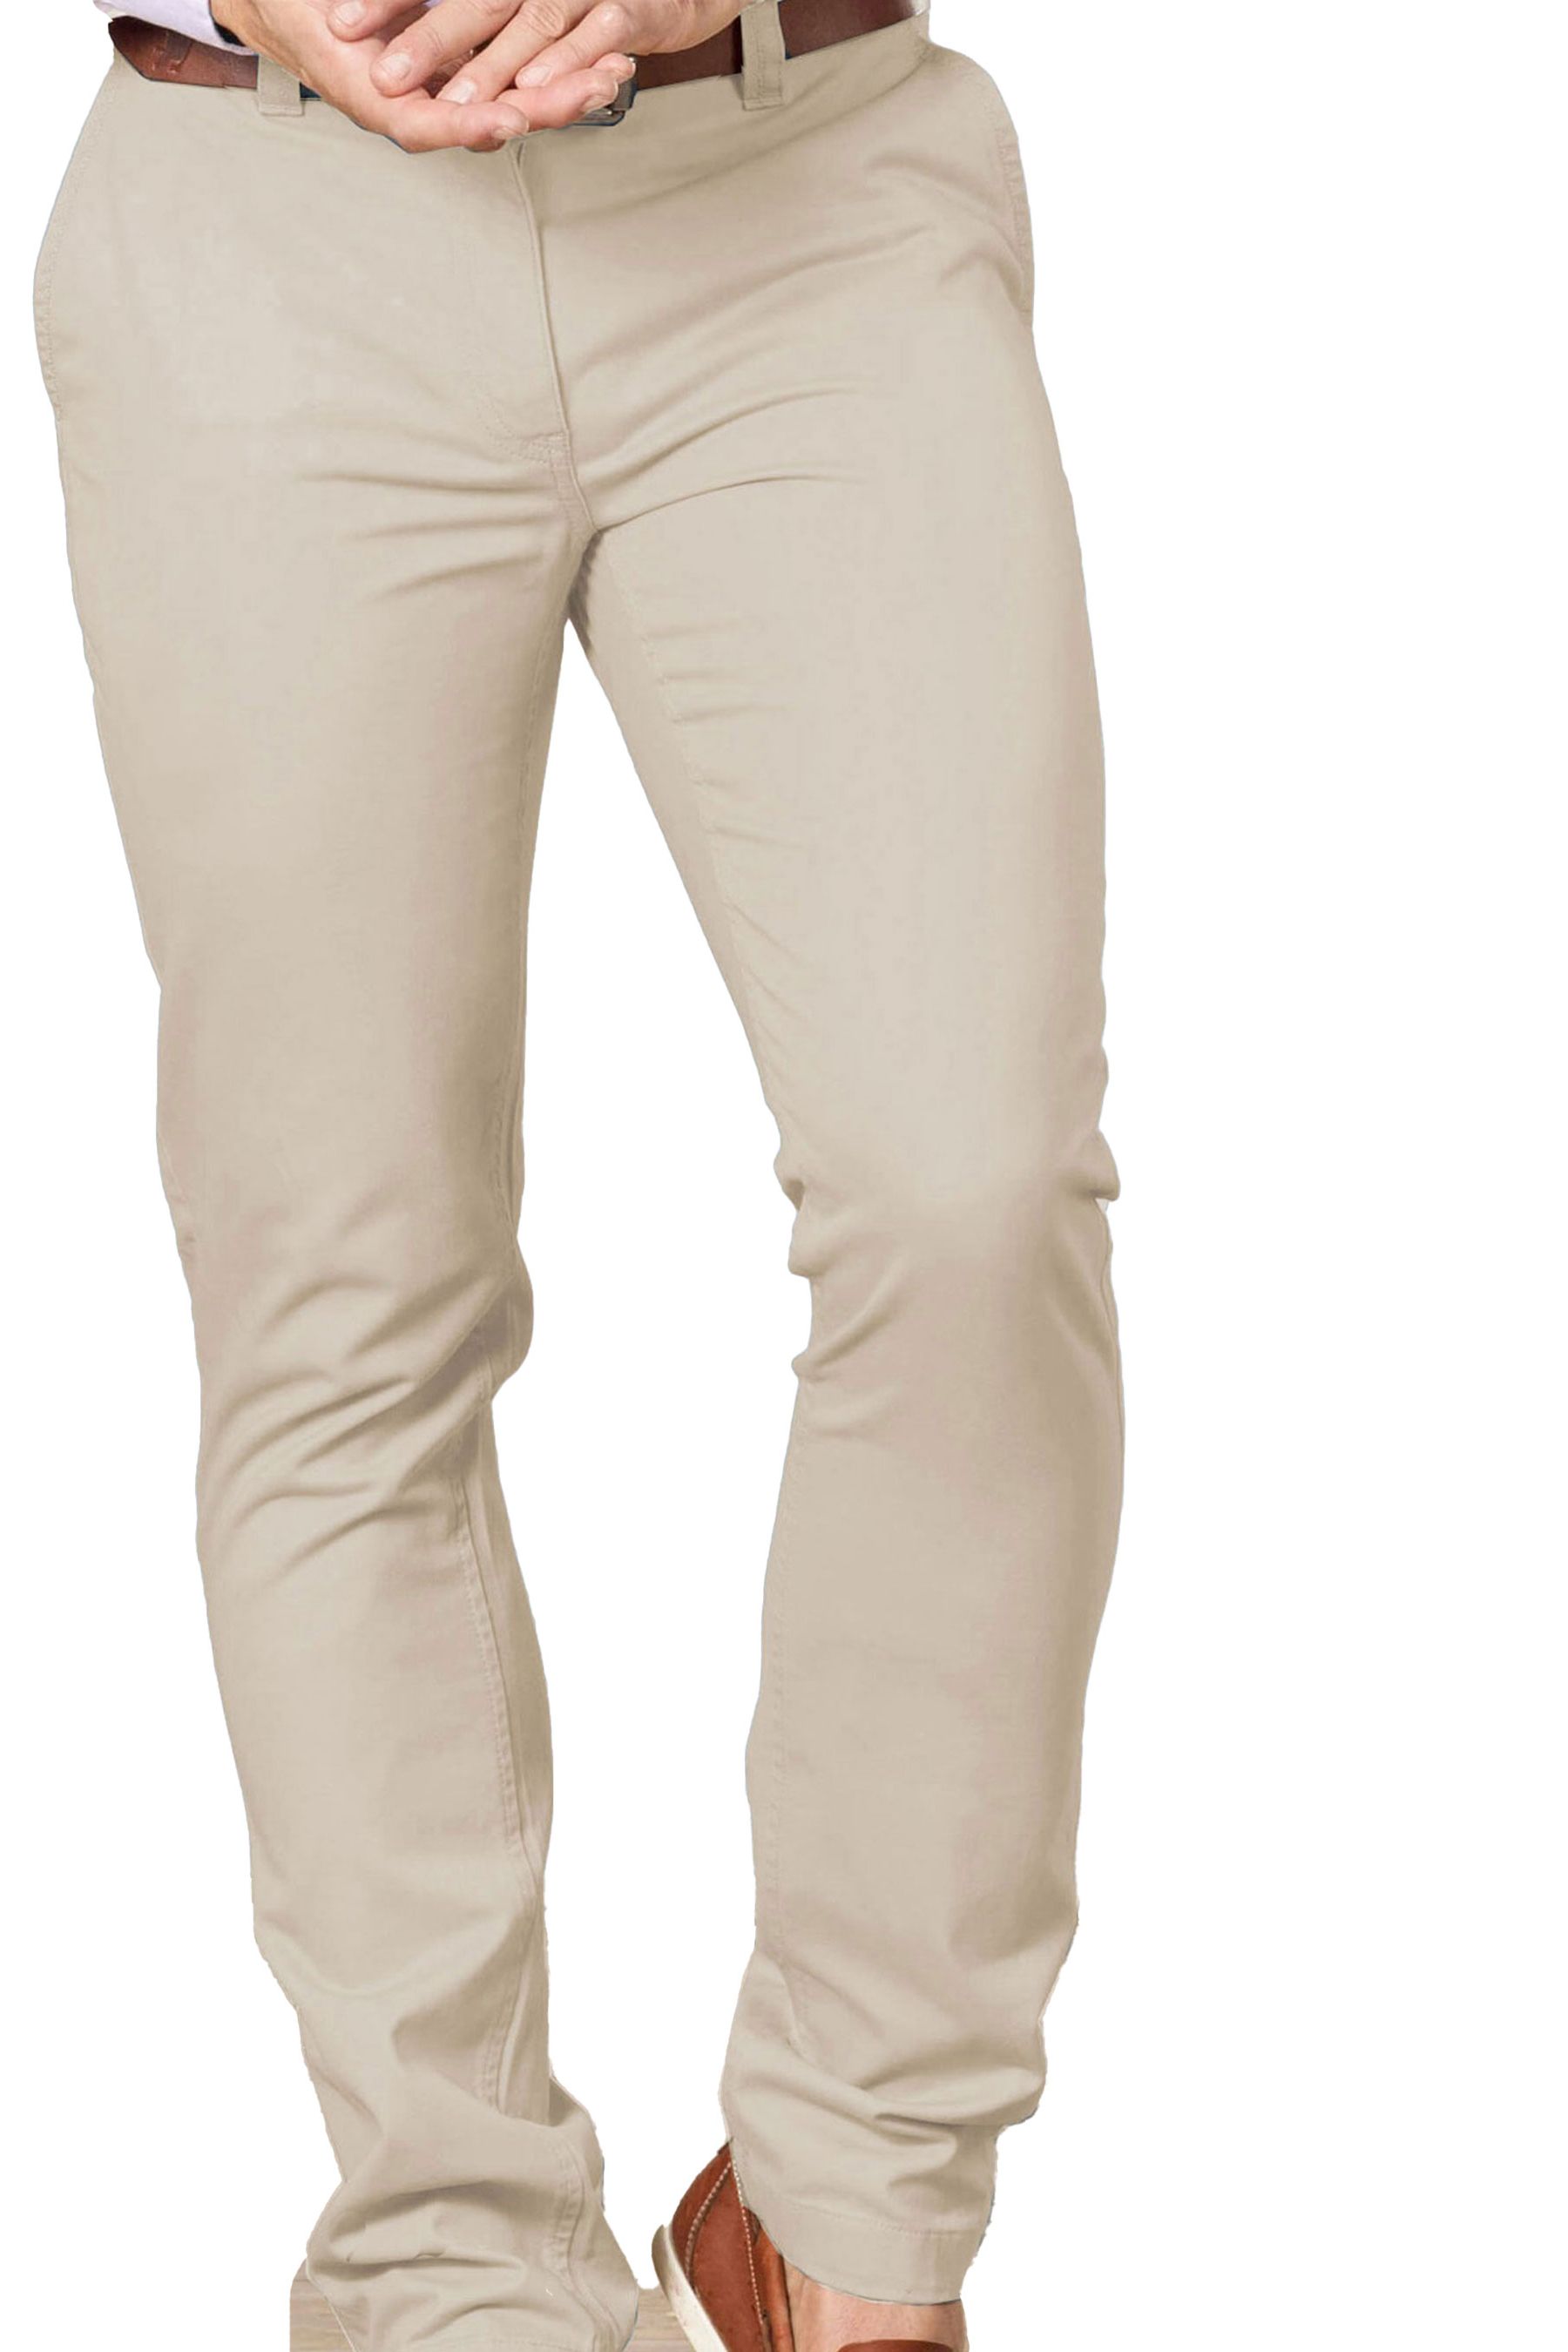 Buy Raging Bull Tan Tapered Chino from the Next UK online shop